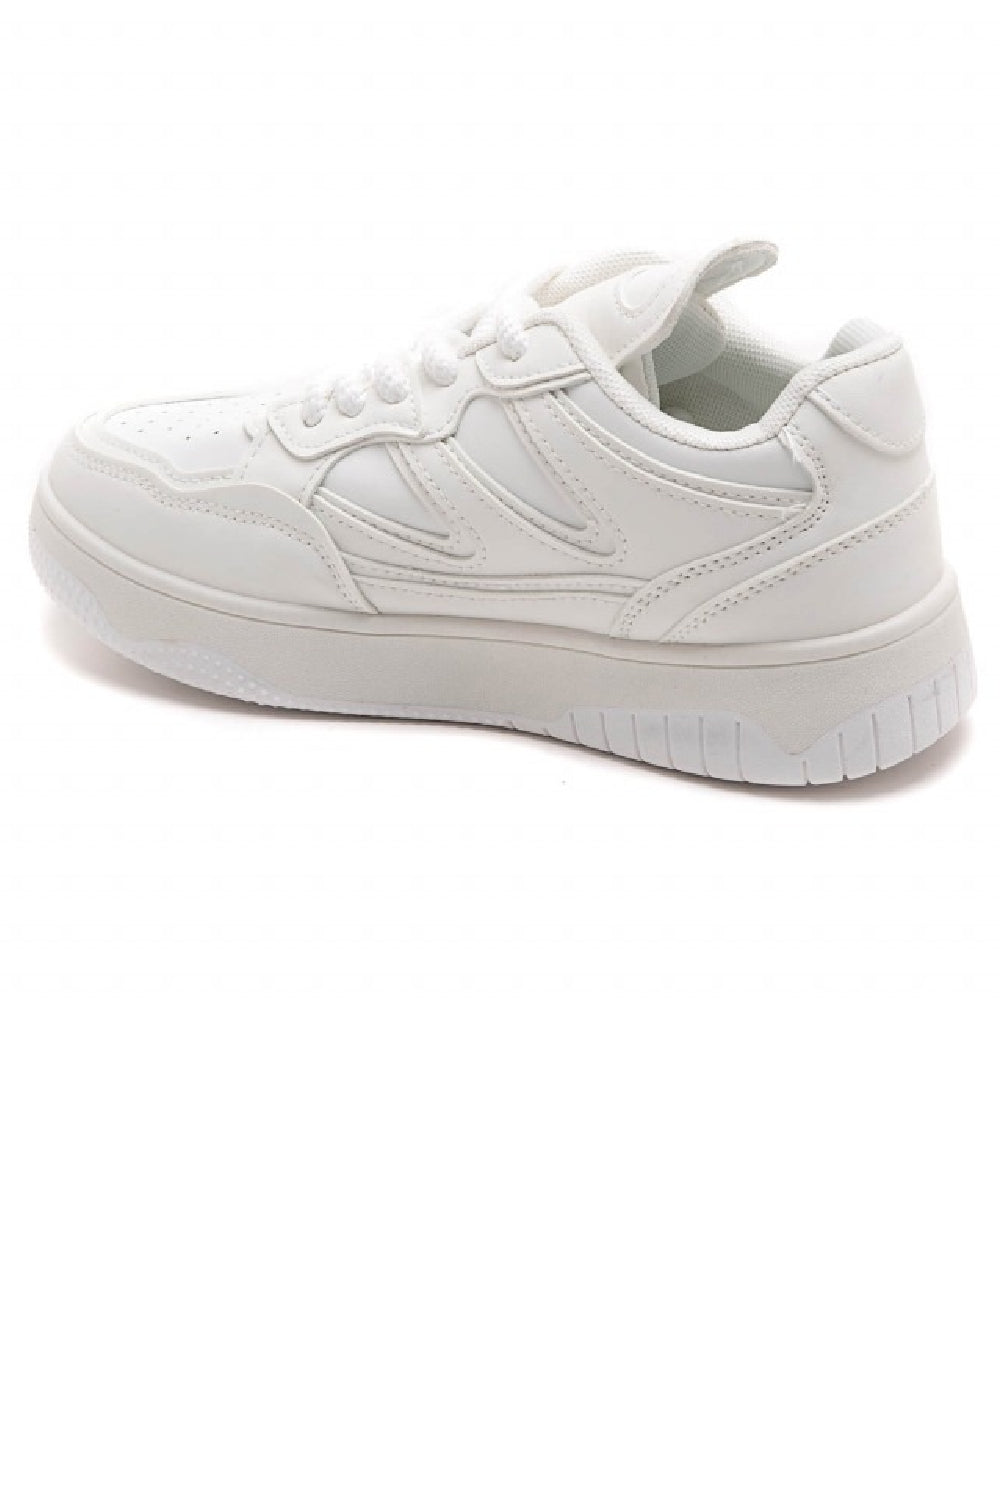 WHITE LACE UP FLAT CHUNKY FASHION SNEAKERS TRAINERS